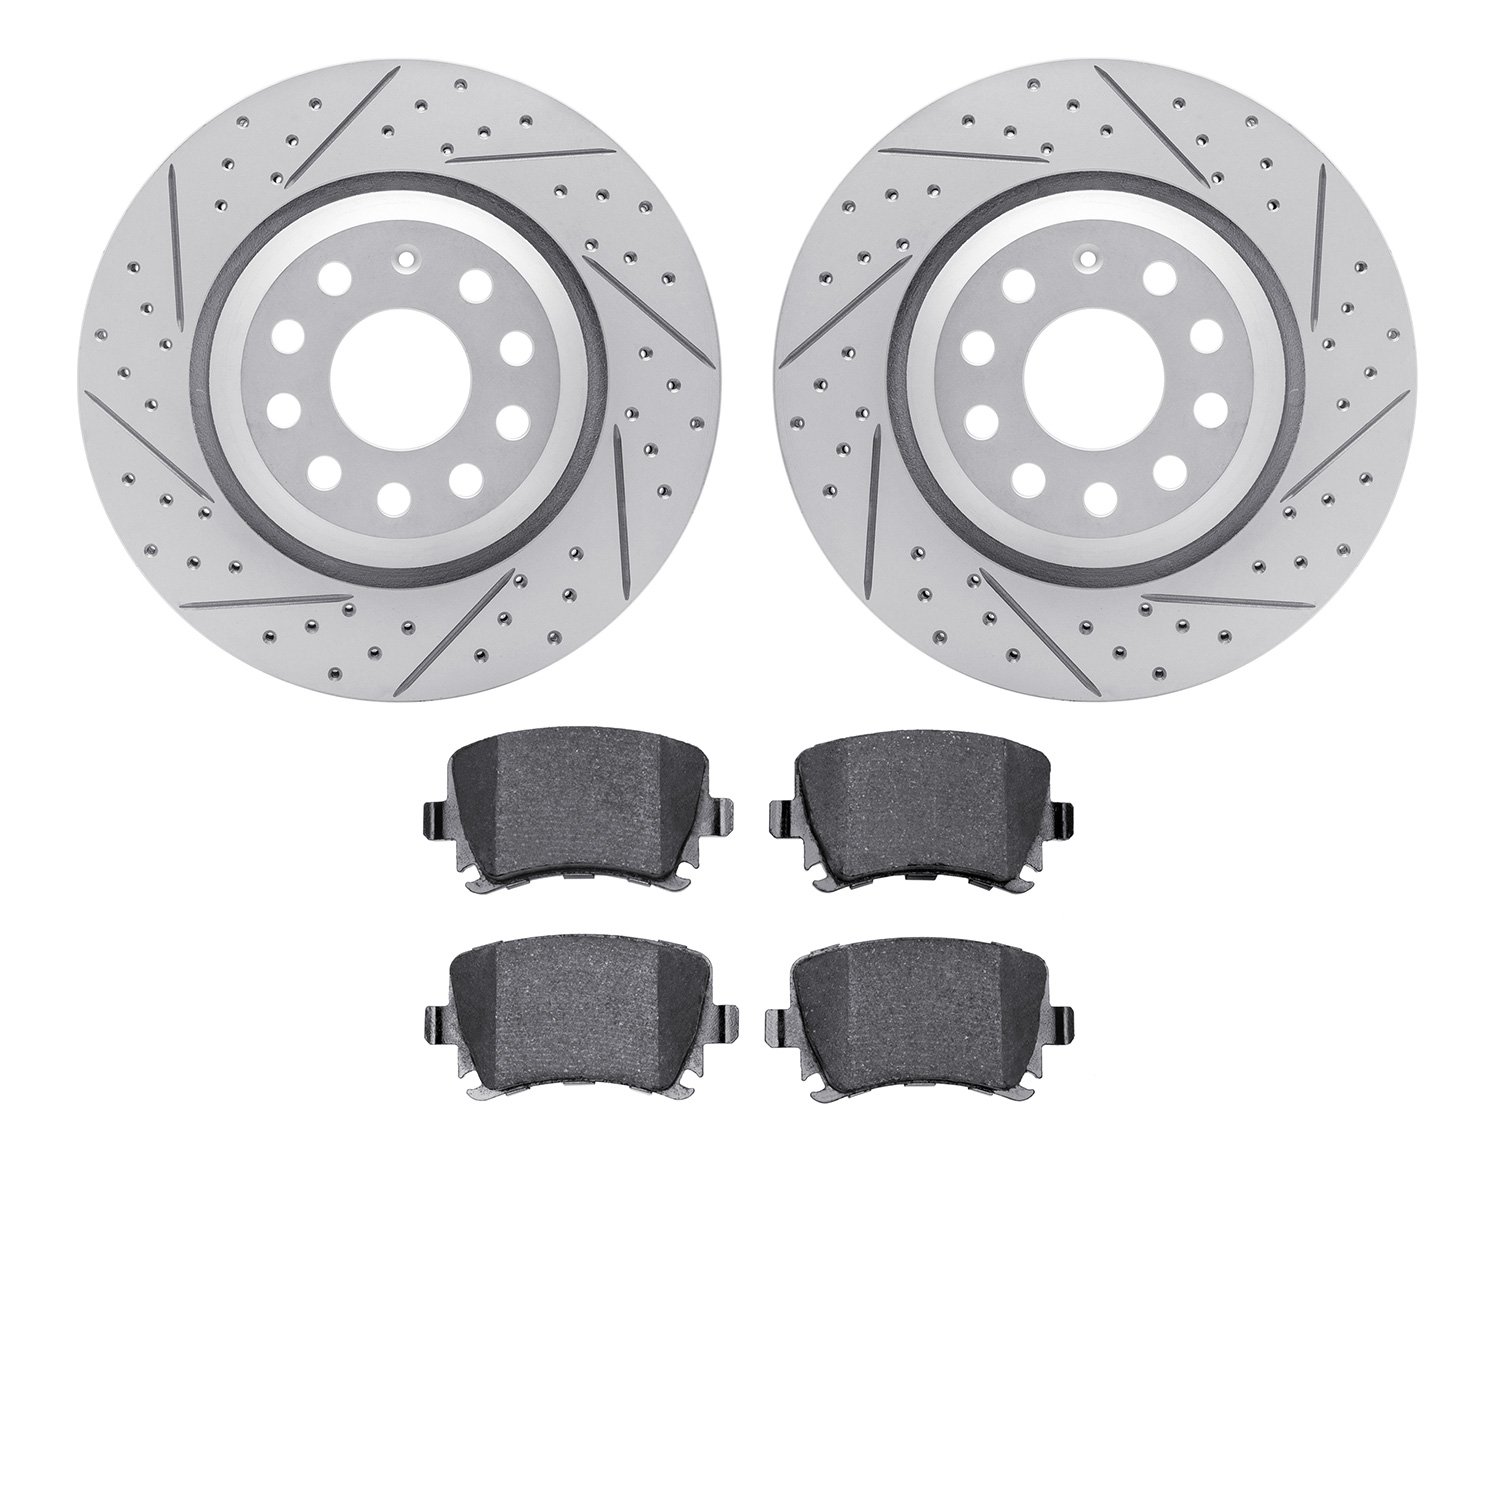 2502-74043 Geoperformance Drilled/Slotted Rotors w/5000 Advanced Brake Pads Kit, 2008-2016 Audi/Volkswagen, Position: Rear